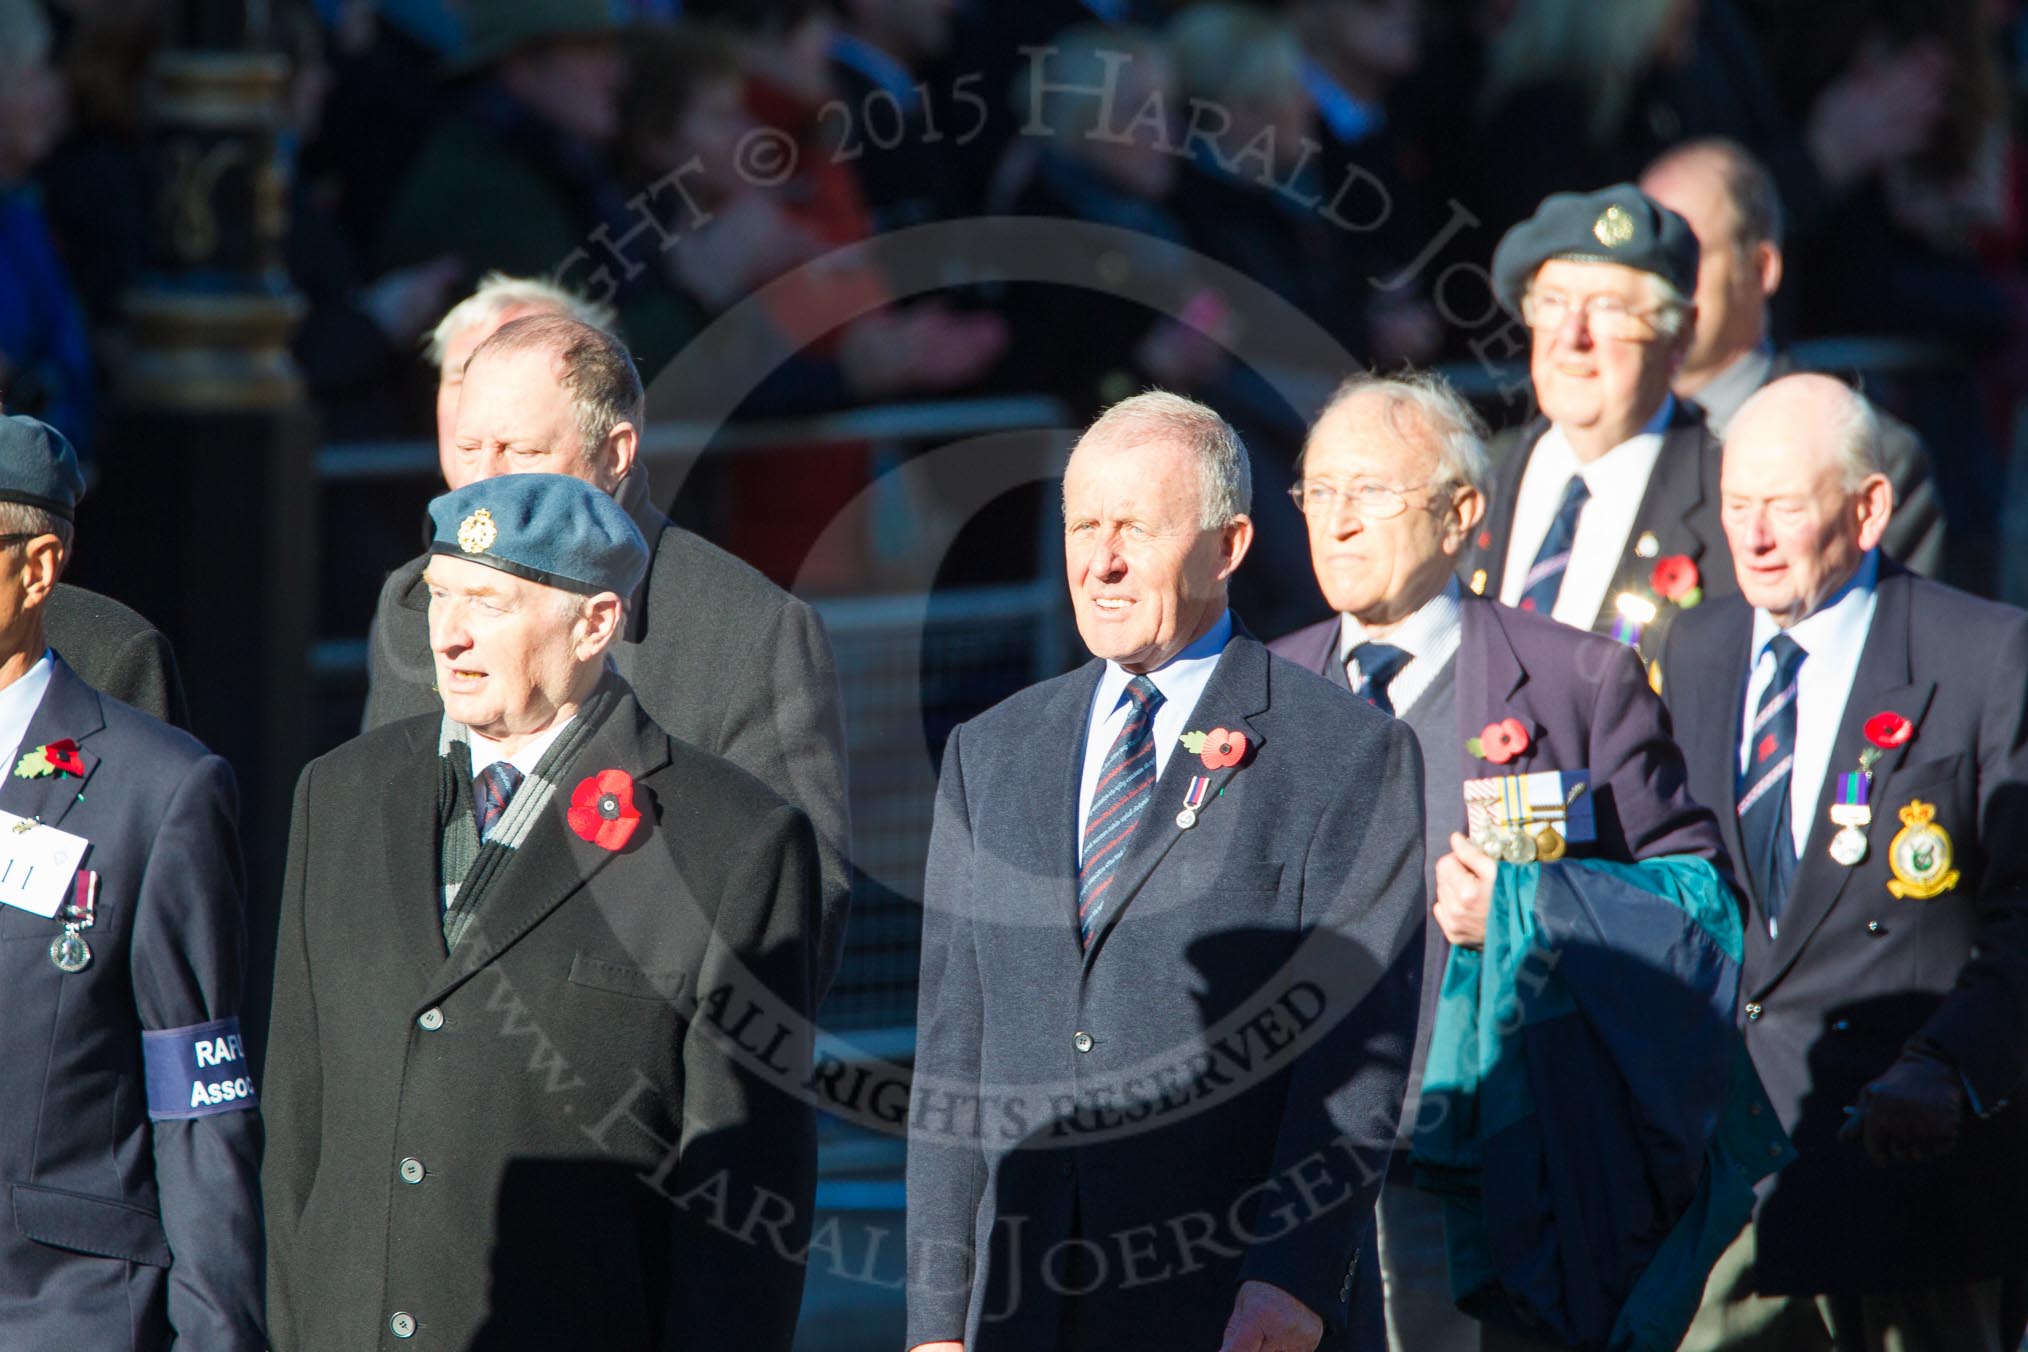 Remembrance Sunday Cenotaph March Past 2013: C11 - RAFLING Association..
Press stand opposite the Foreign Office building, Whitehall, London SW1,
London,
Greater London,
United Kingdom,
on 10 November 2013 at 12:07, image #1781